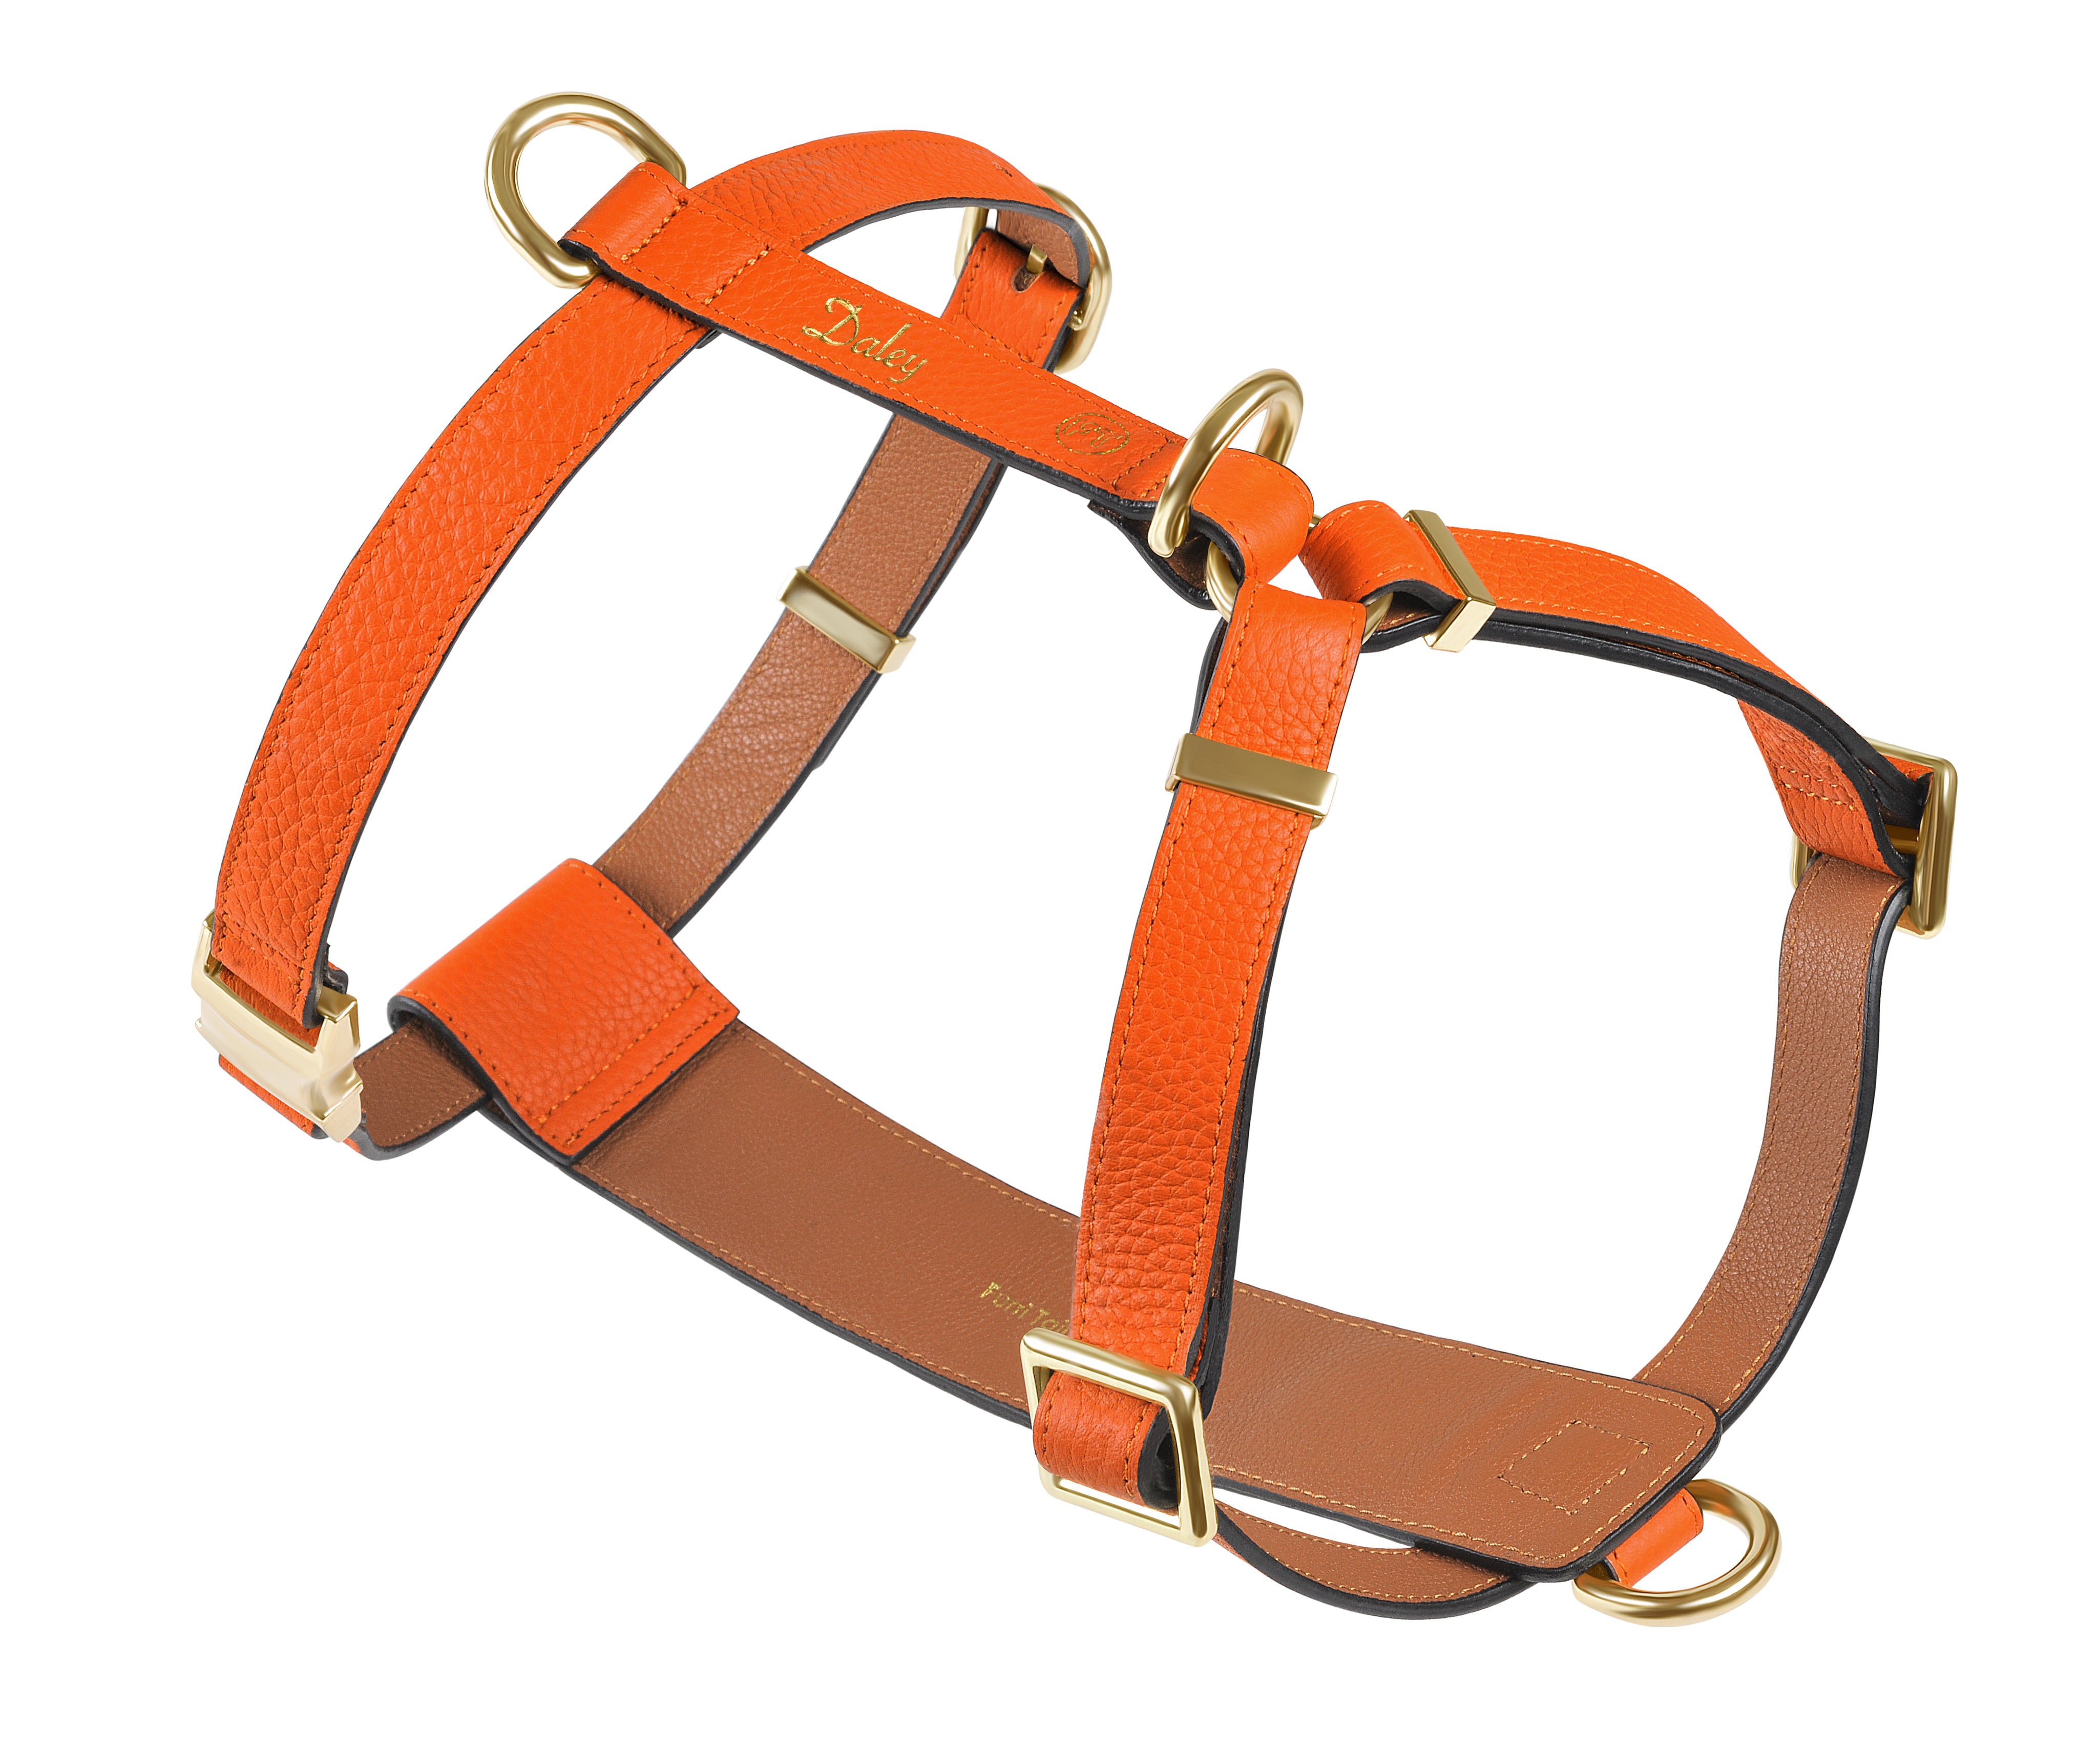 Luxe Leather Dog Harness - Saffron